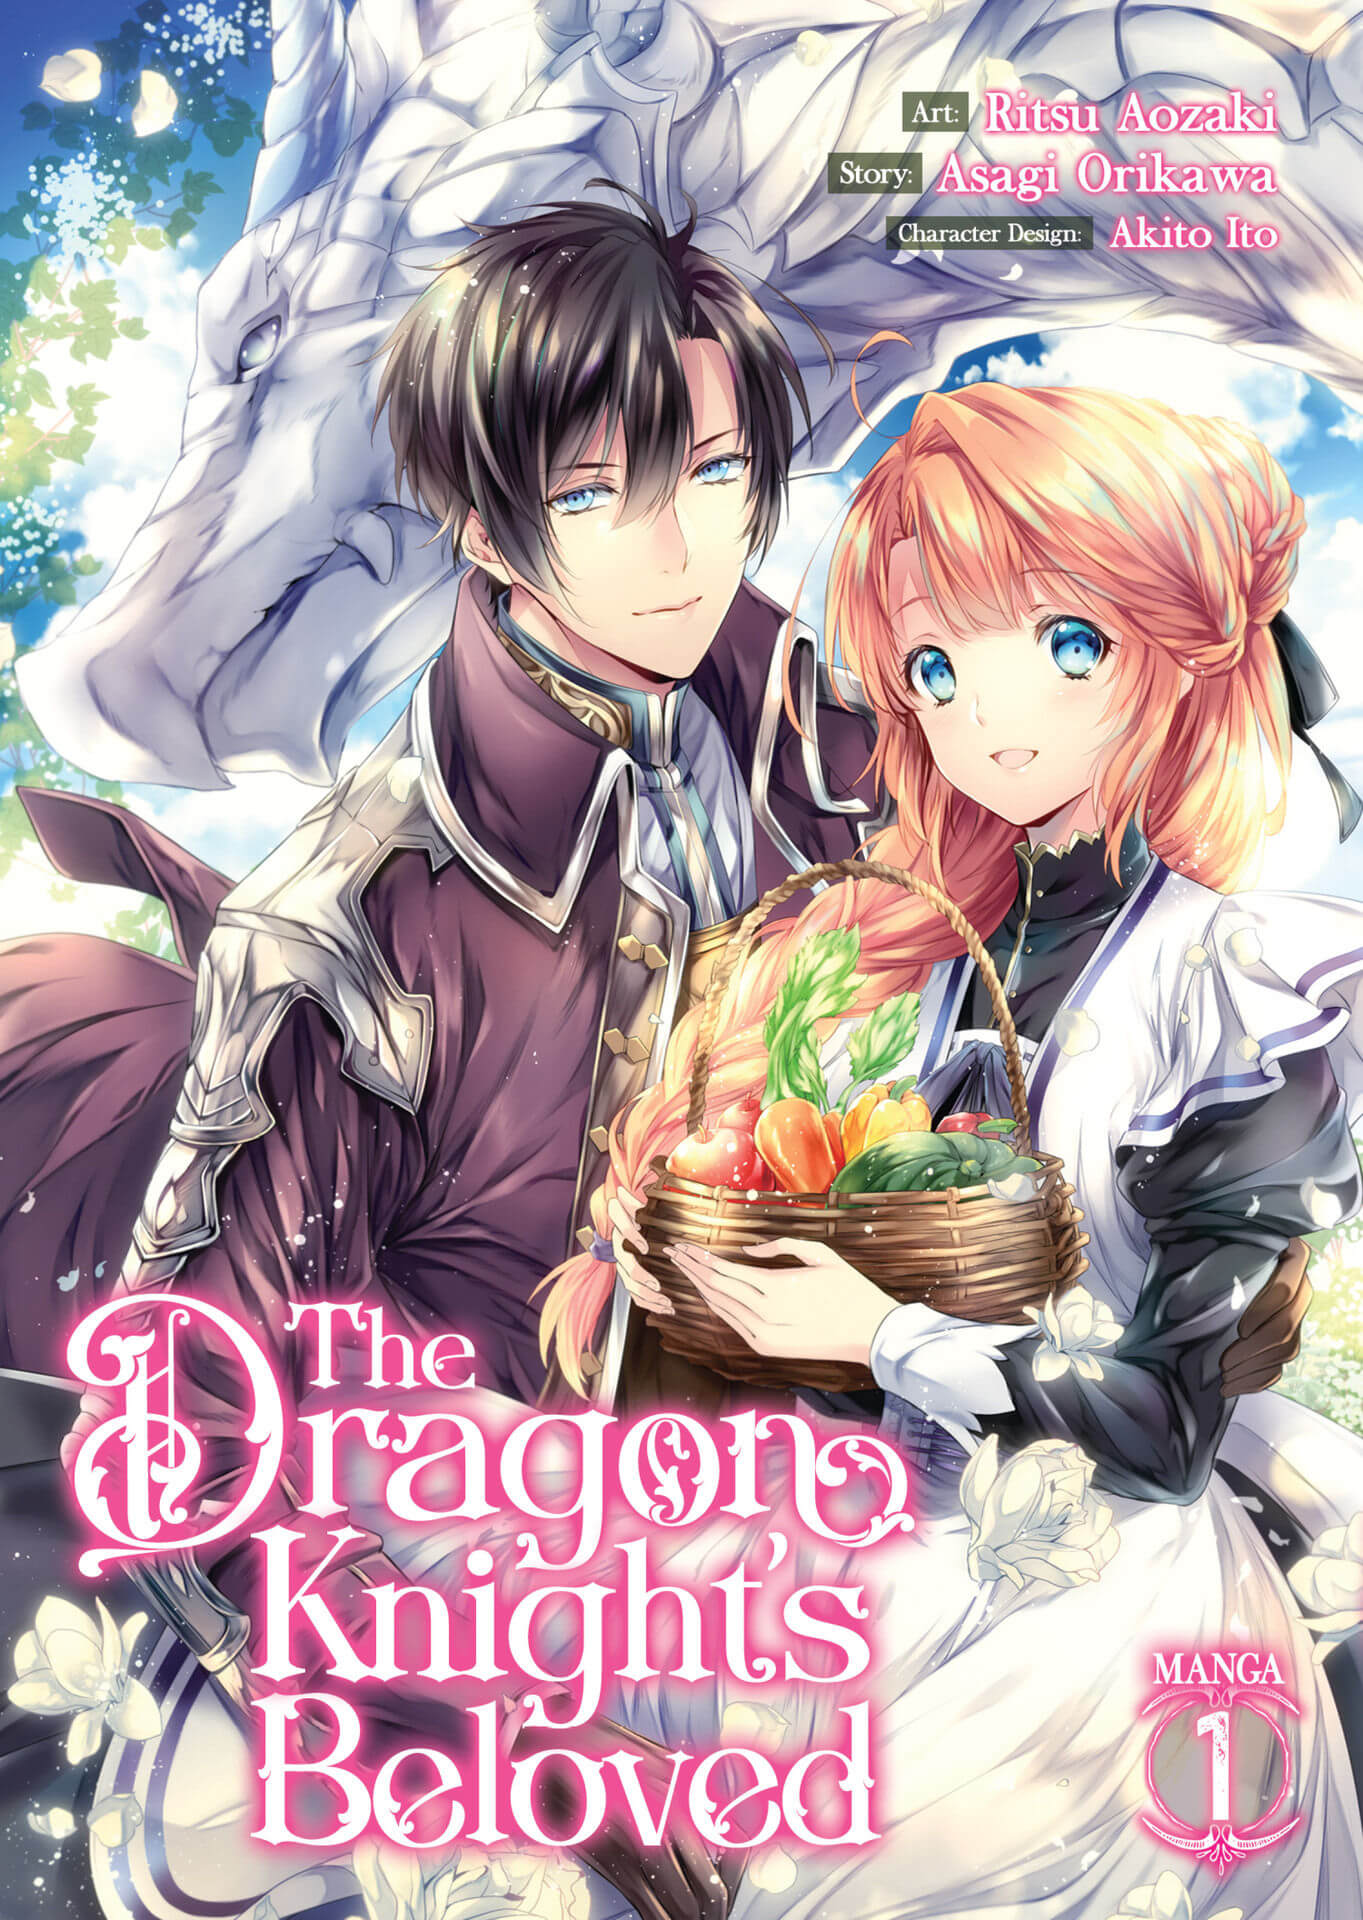 Dragon Knight's Beloved Volume 1's cover